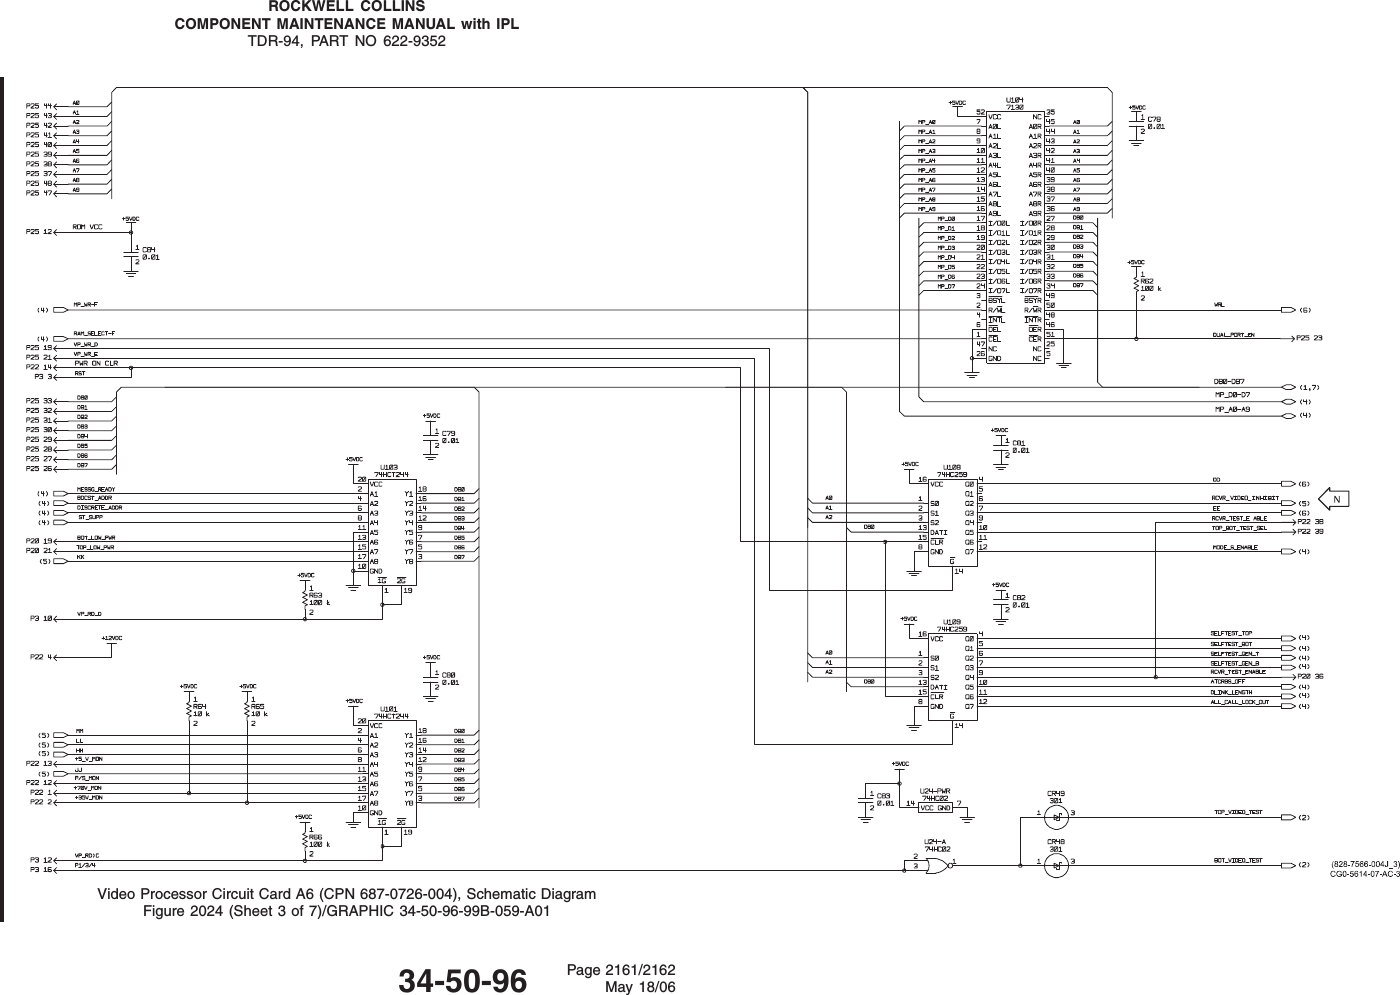 ROCKWELL COLLINSCOMPONENT MAINTENANCE MANUAL with IPLTDR-94, PART NO 622-9352Video Processor Circuit Card A6 (CPN 687-0726-004), Schematic DiagramFigure 2024 (Sheet 3 of 7)/GRAPHIC 34-50-96-99B-059-A0134-50-96 Page 2161/2162May 18/06